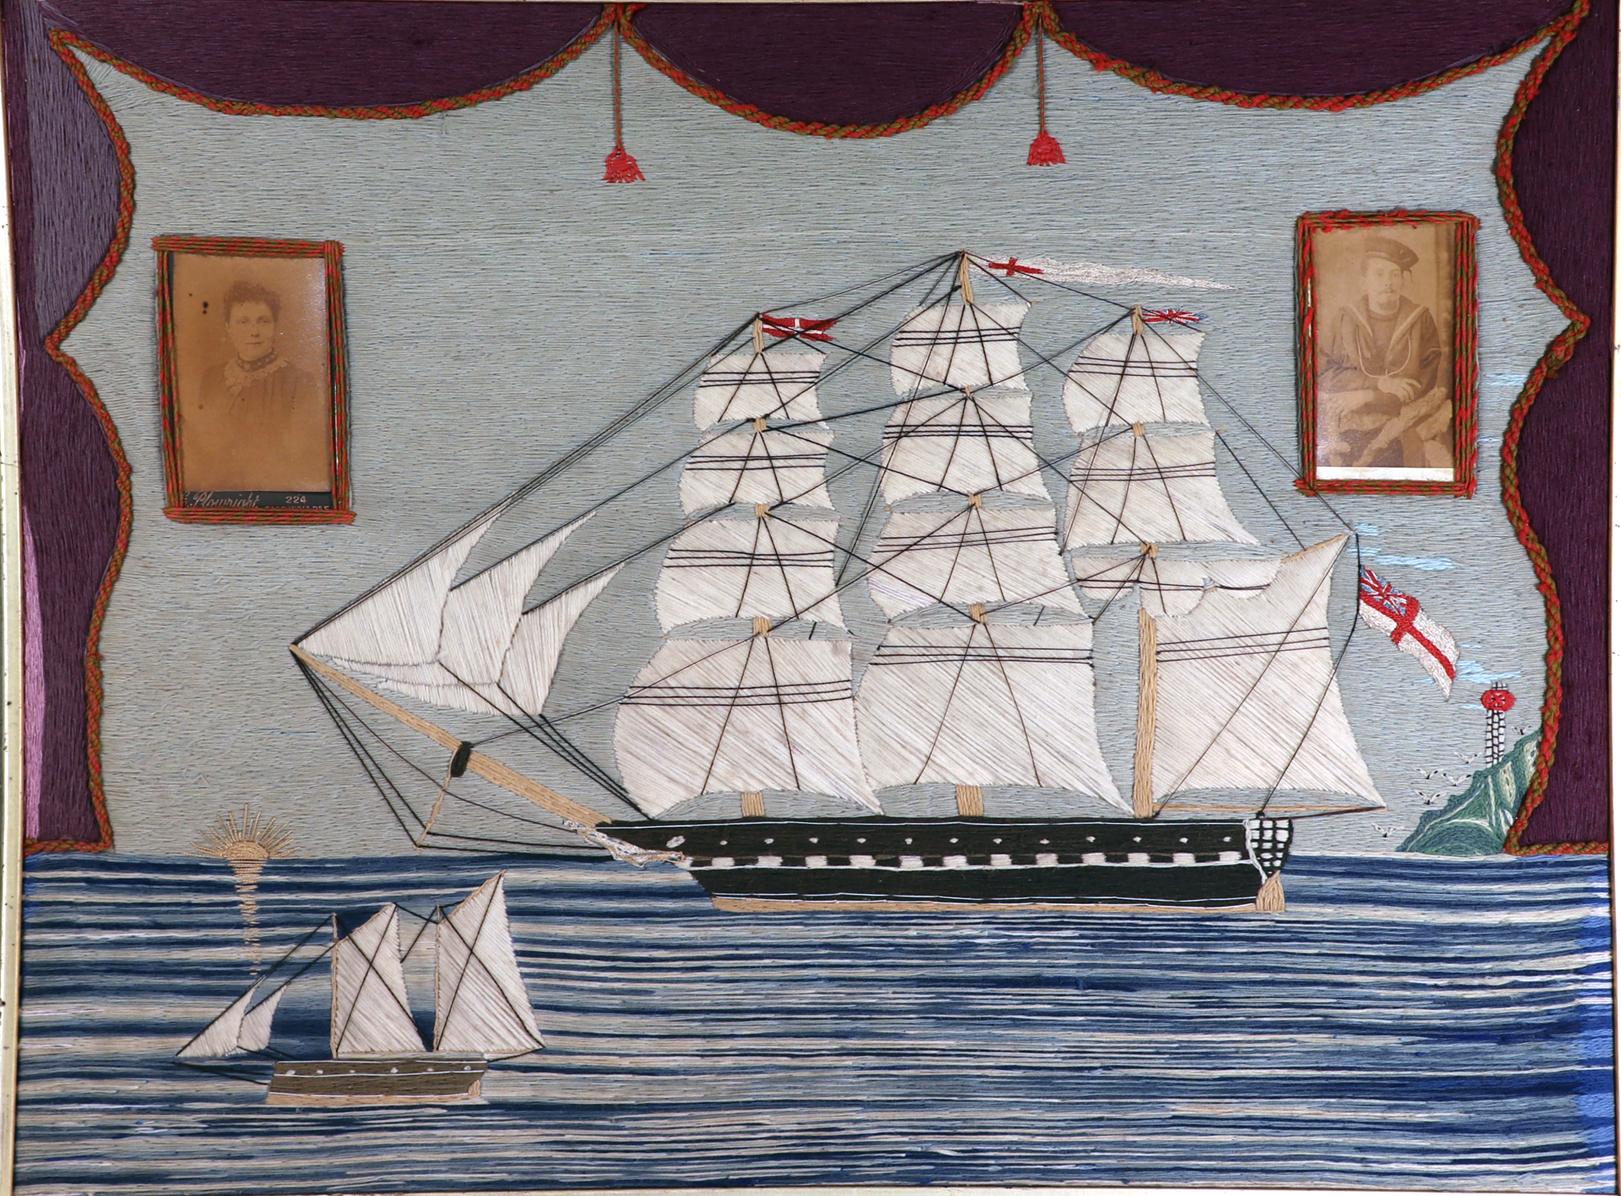 British Sailor's Woolwork of Royal Navy Ship at Sea,
Circa 1870

The sailor's woolwork or woolie depicts a port side view of the Royal Navy frigate under full sail and flying the White Ensign.  The ship sails on a wavy sea depicted in bands of blue